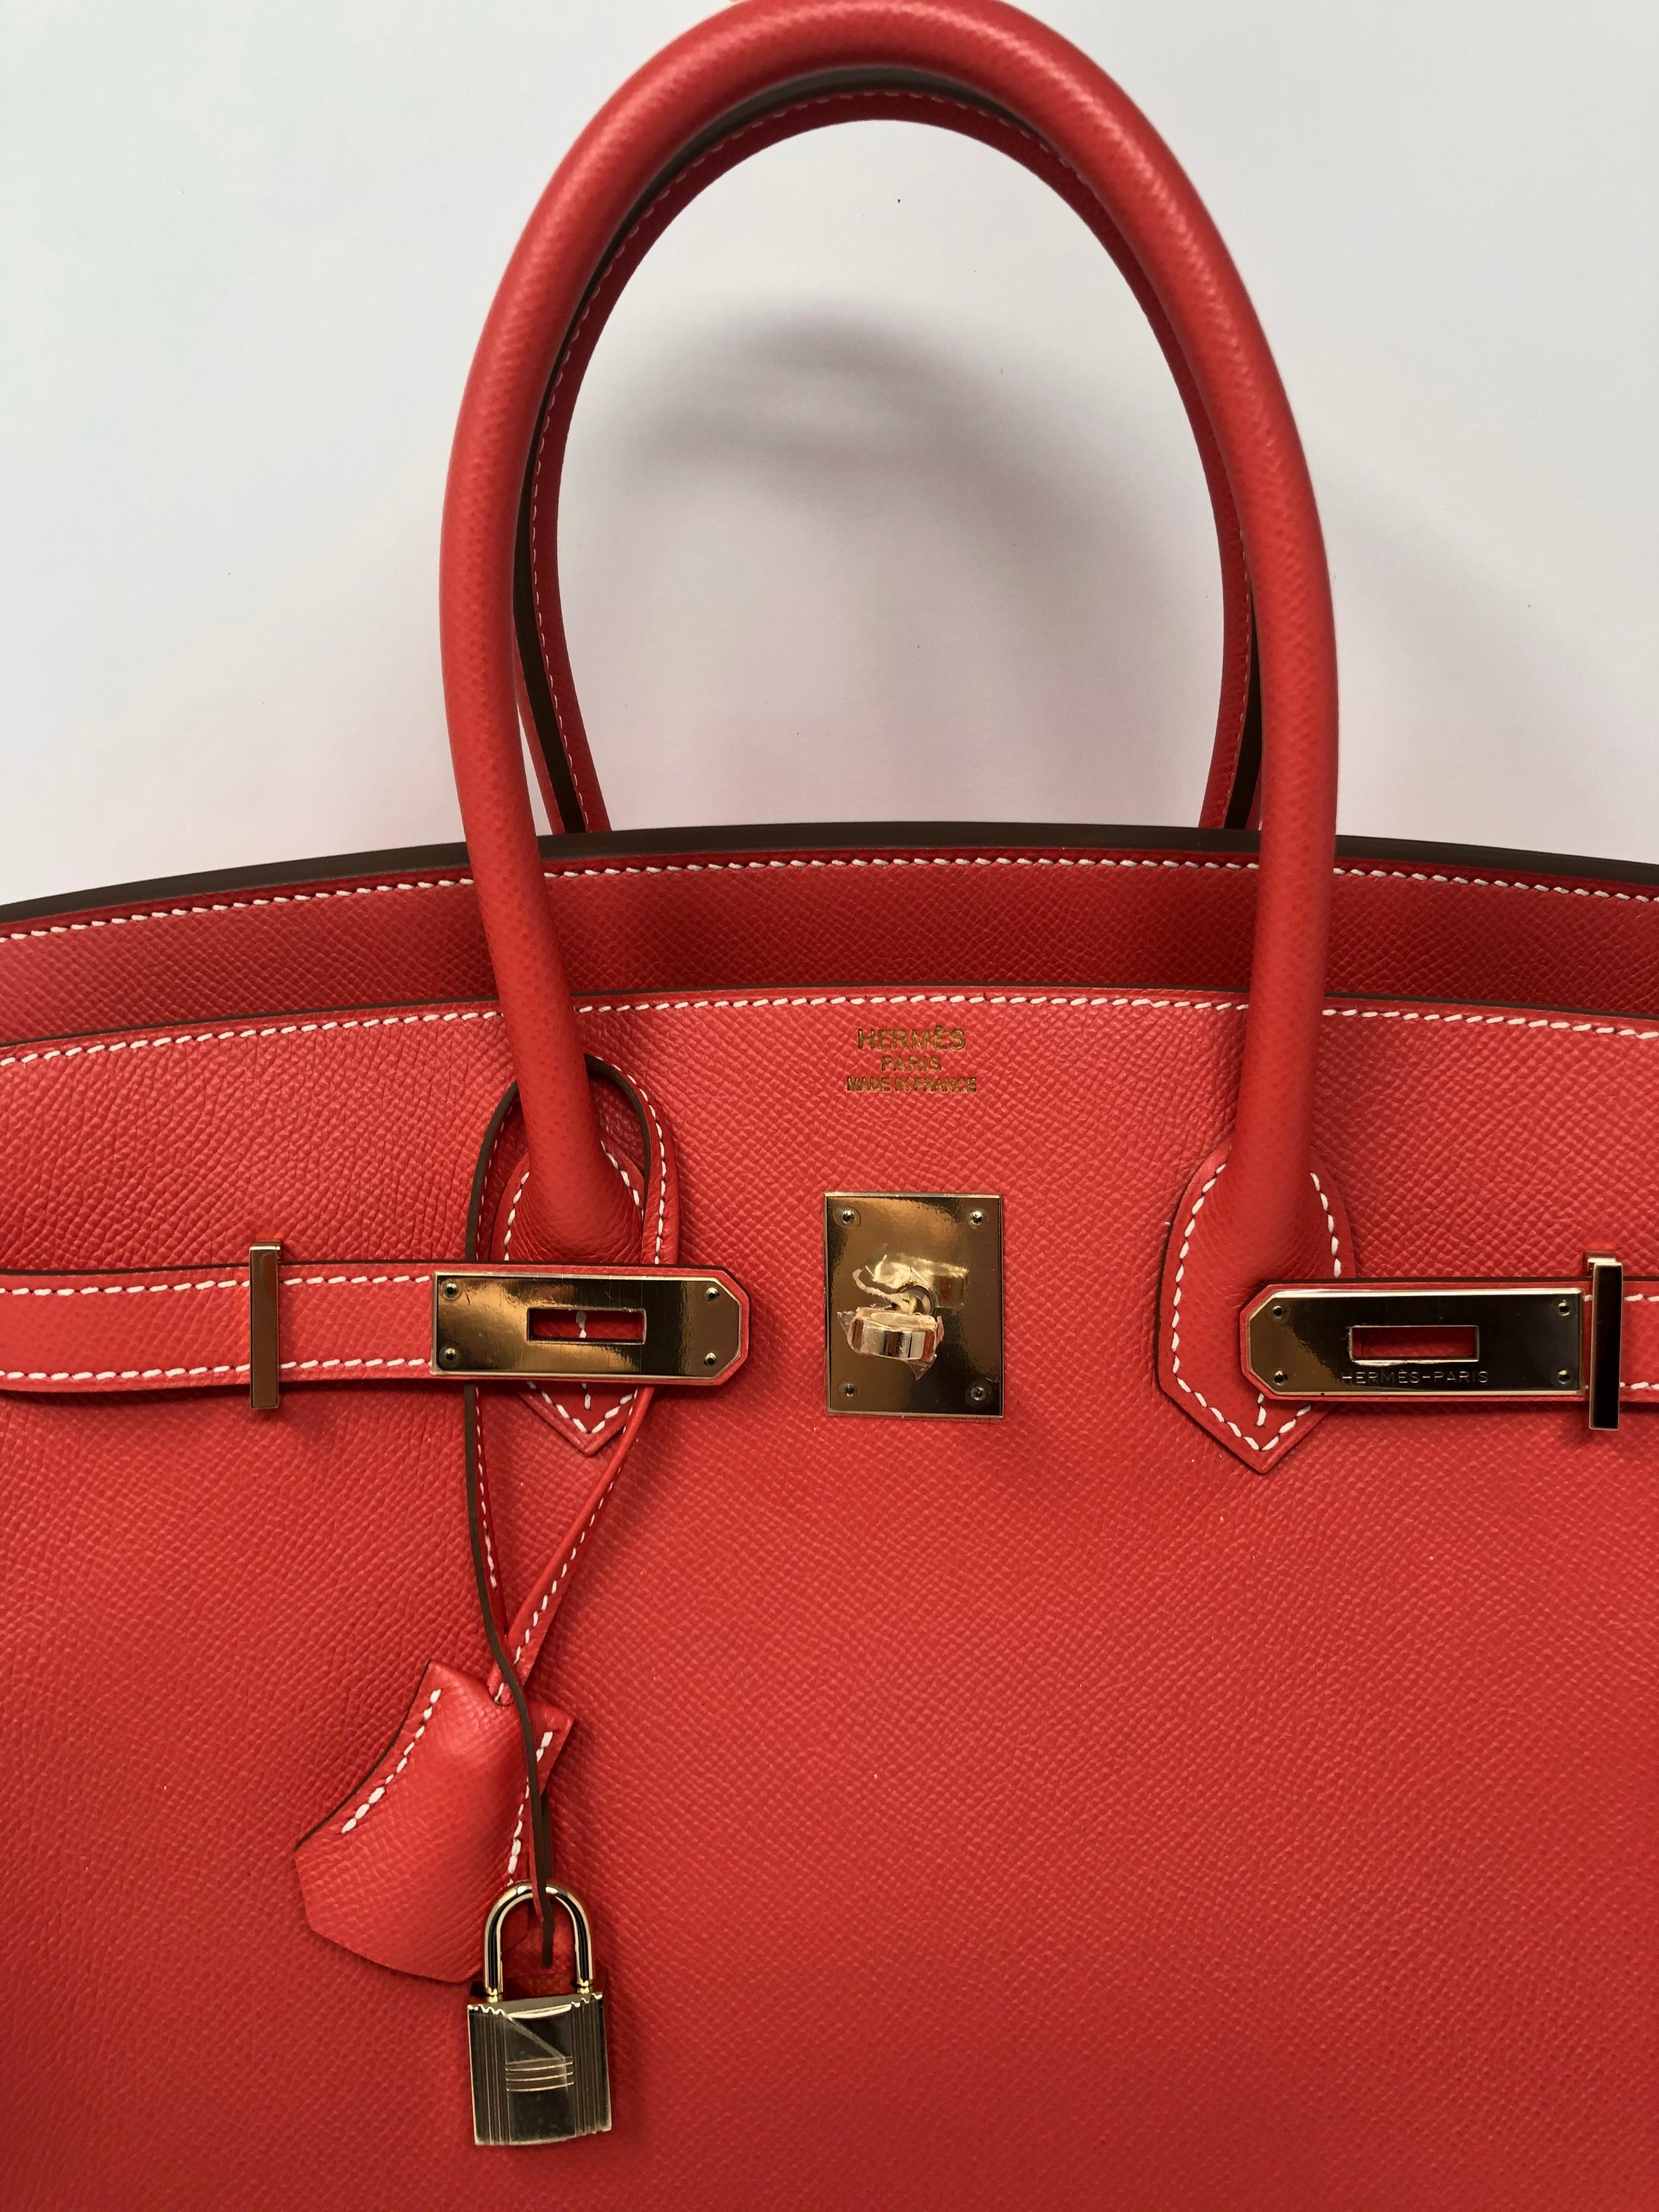 Hermes Birkin 35 Candy Rose Jaipur Bag. Veau Epsom Leather with gold hardware. Candy Limited Edition Bag. Interior tan leather. Exterior Rose Jaipur color. Mint condition. Like new. From 2012. Plastic is still on hardware. Includes full set. The